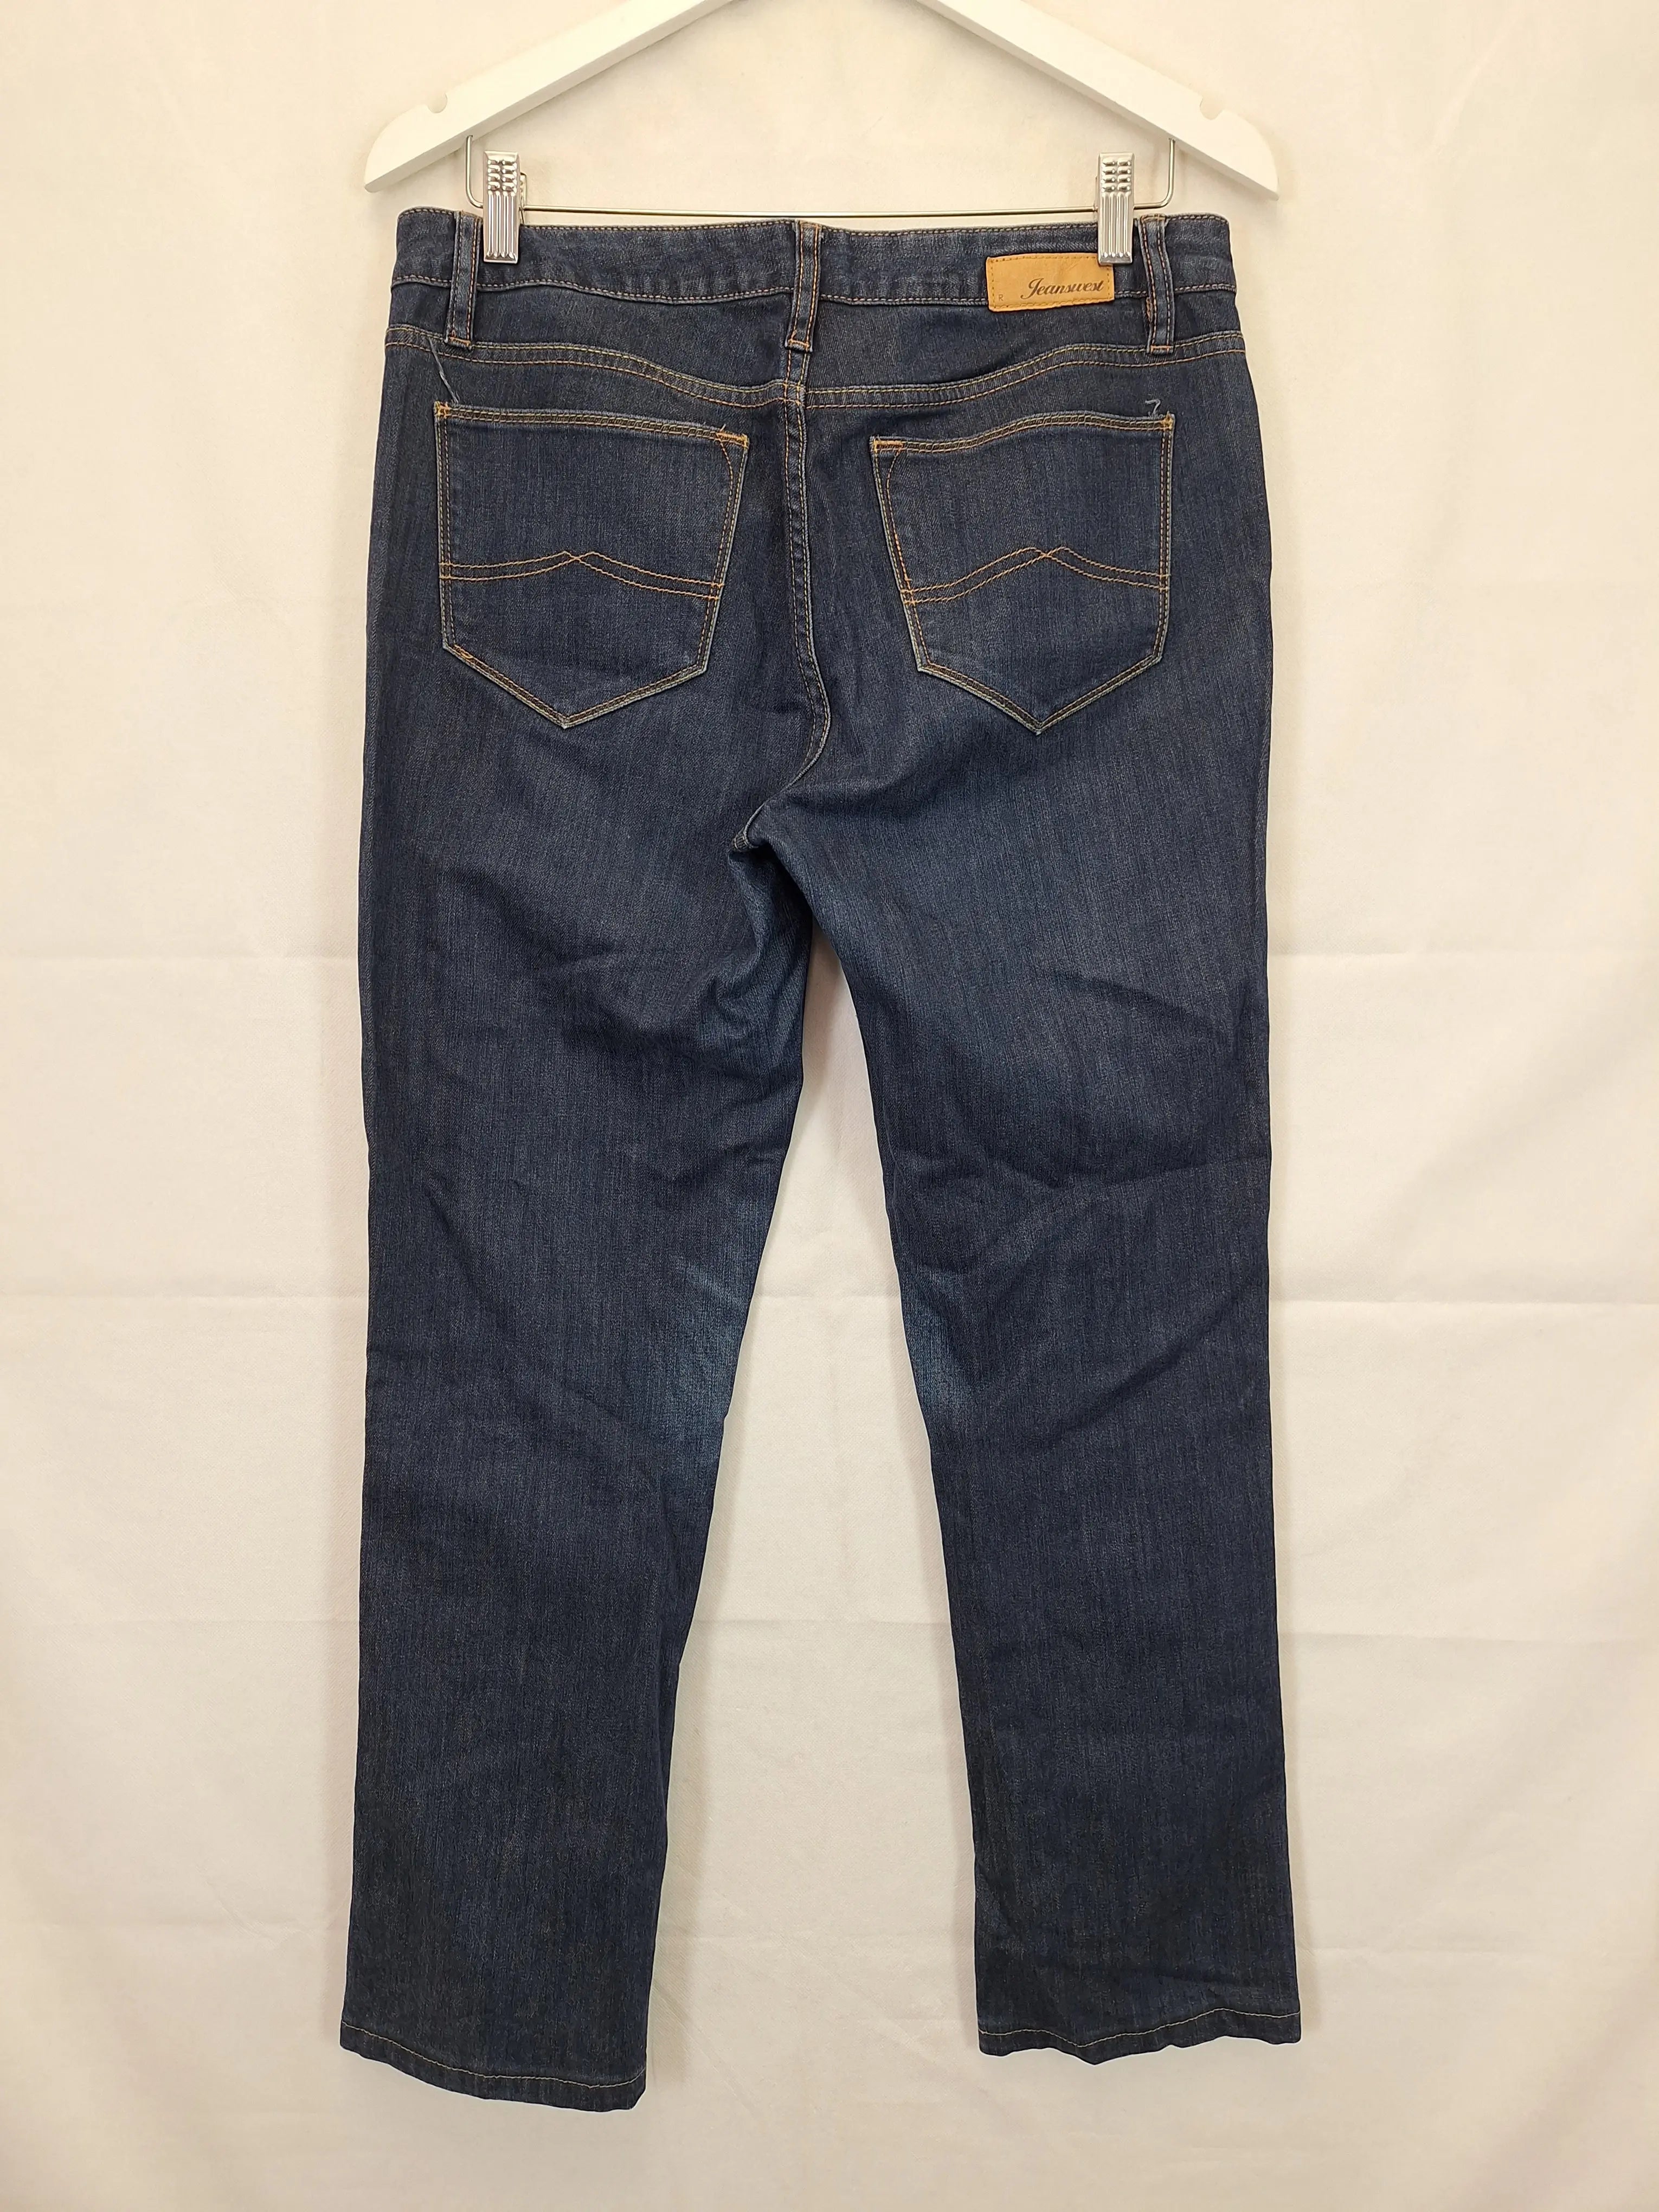 Jeanswest Tummy Trimmer Slim Straight Jeans Size 12 by SwapUp Online Second Hand Store Thrift Store Op Shop 20734284